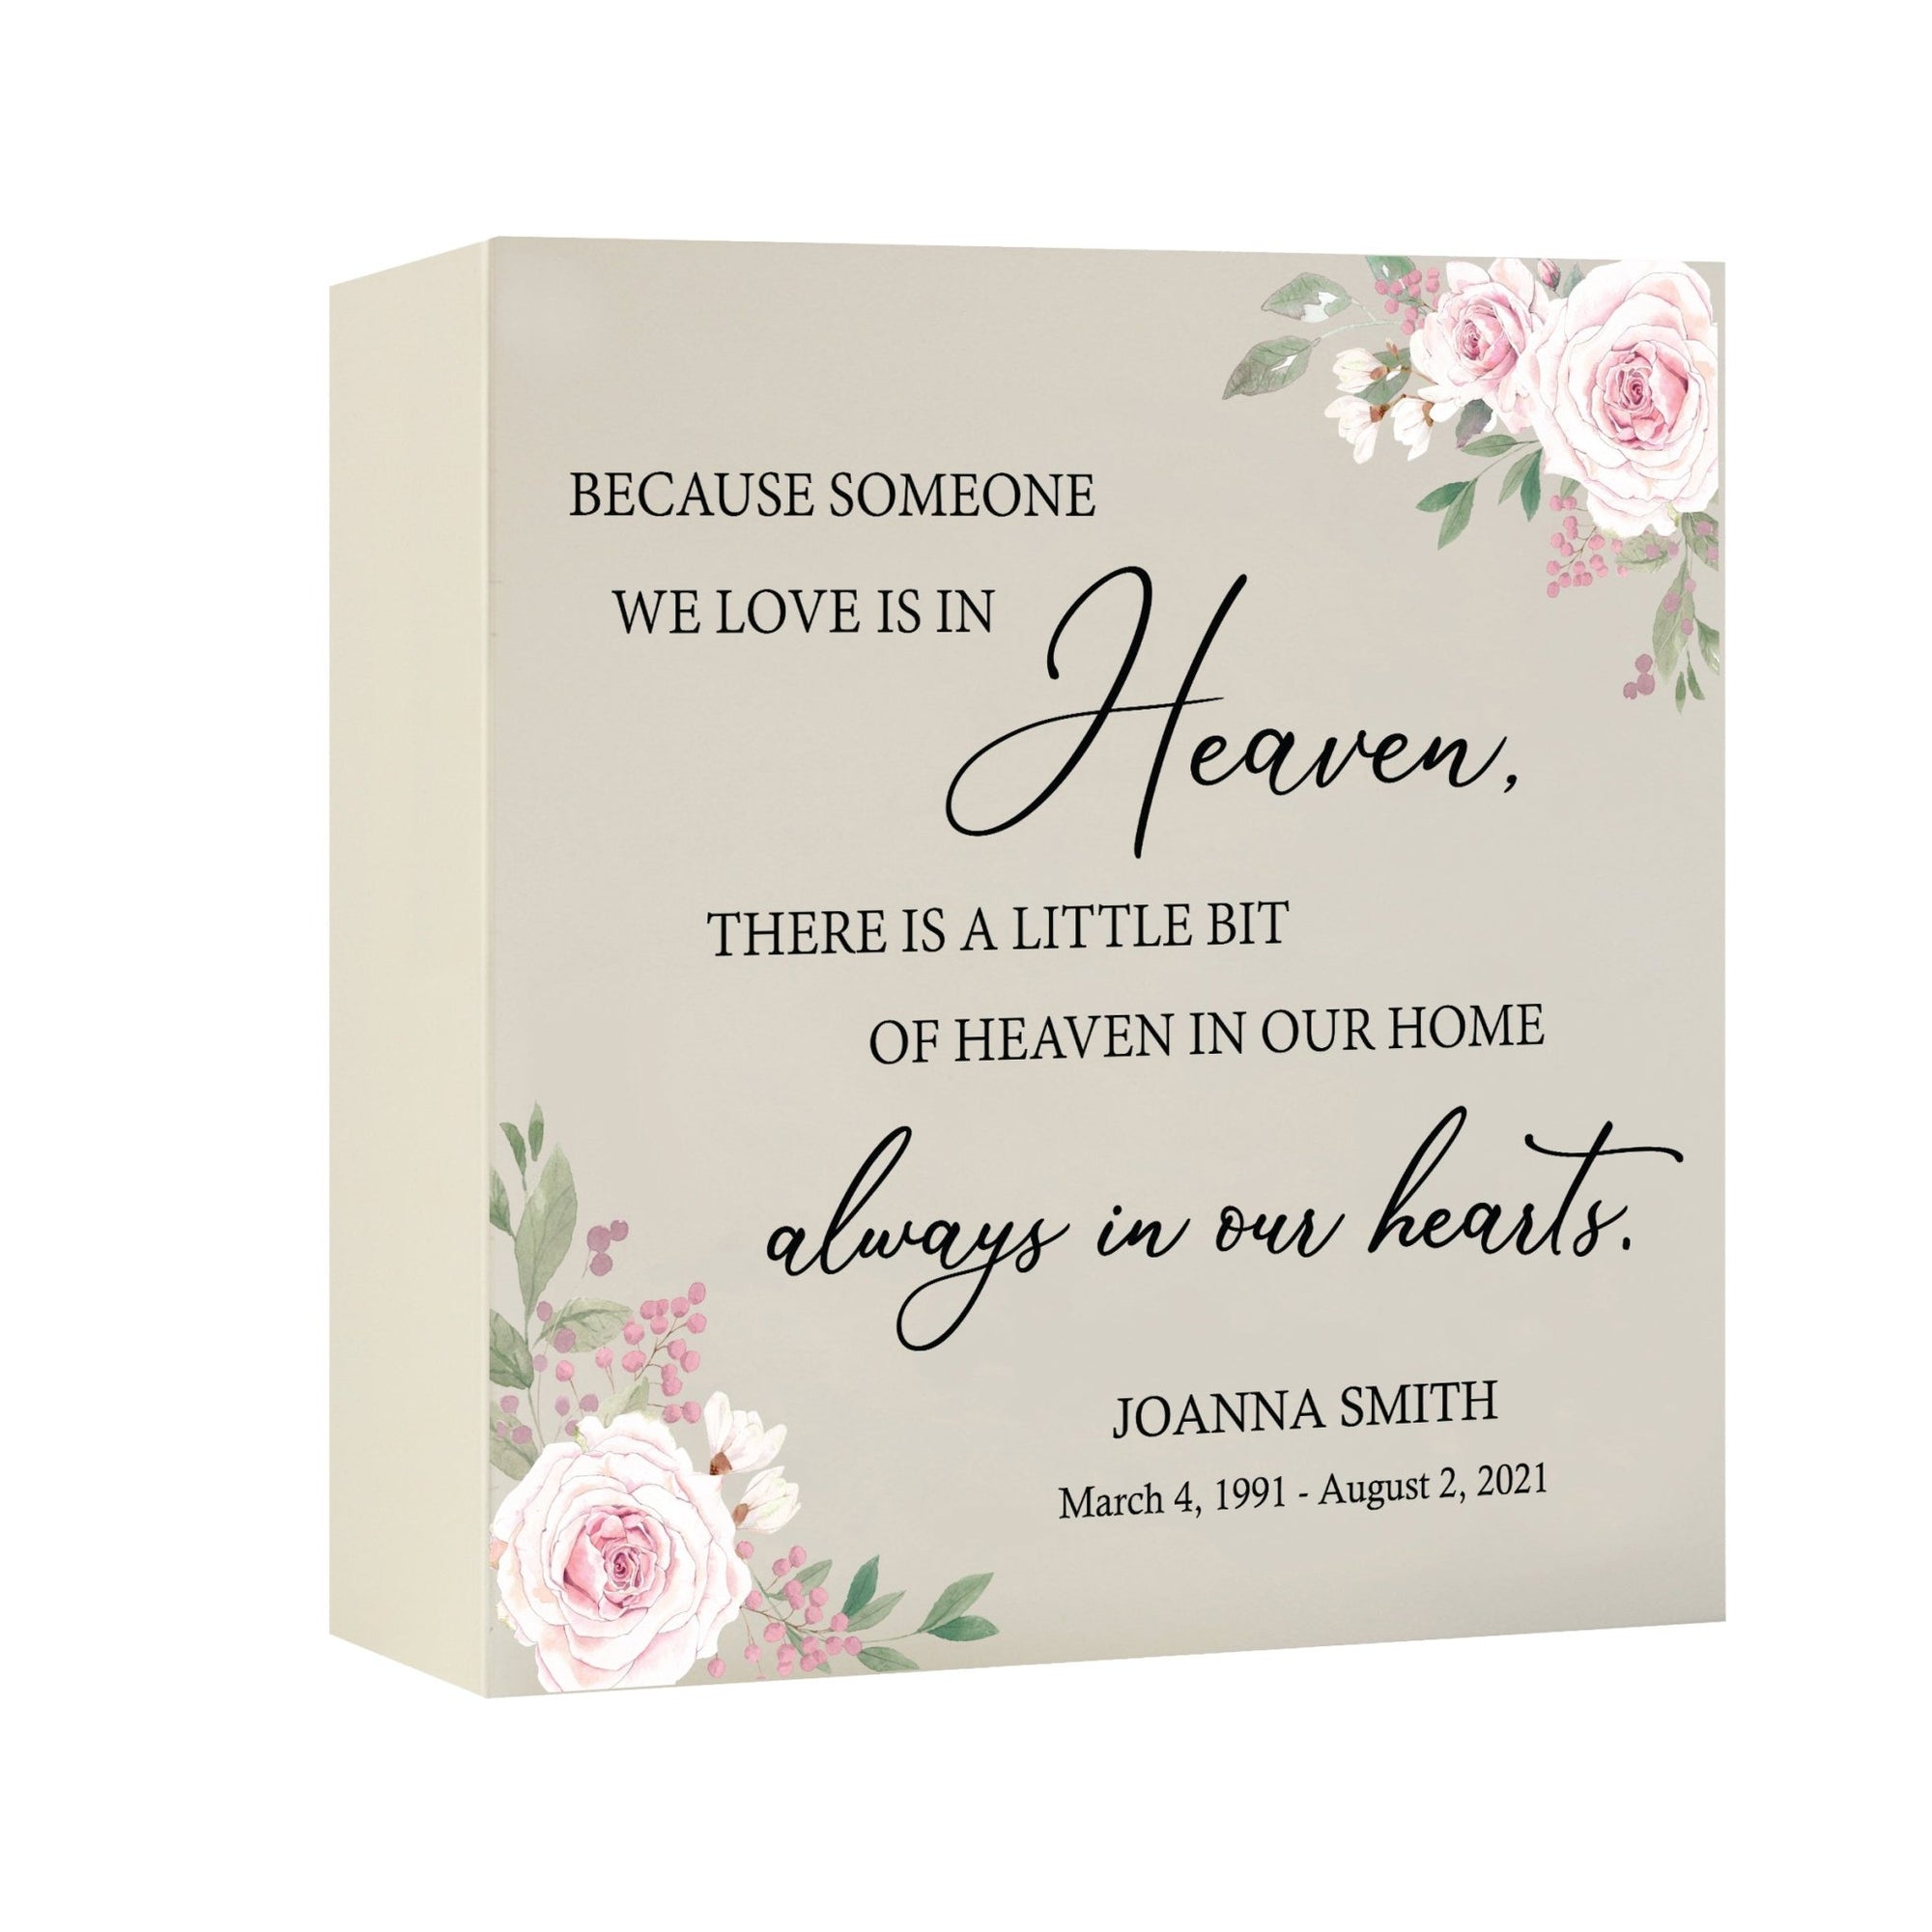 Timeless Human Memorial Shadow Box Urn With Inspirational Verse in Ivory - Because Someone We Love - LifeSong Milestones